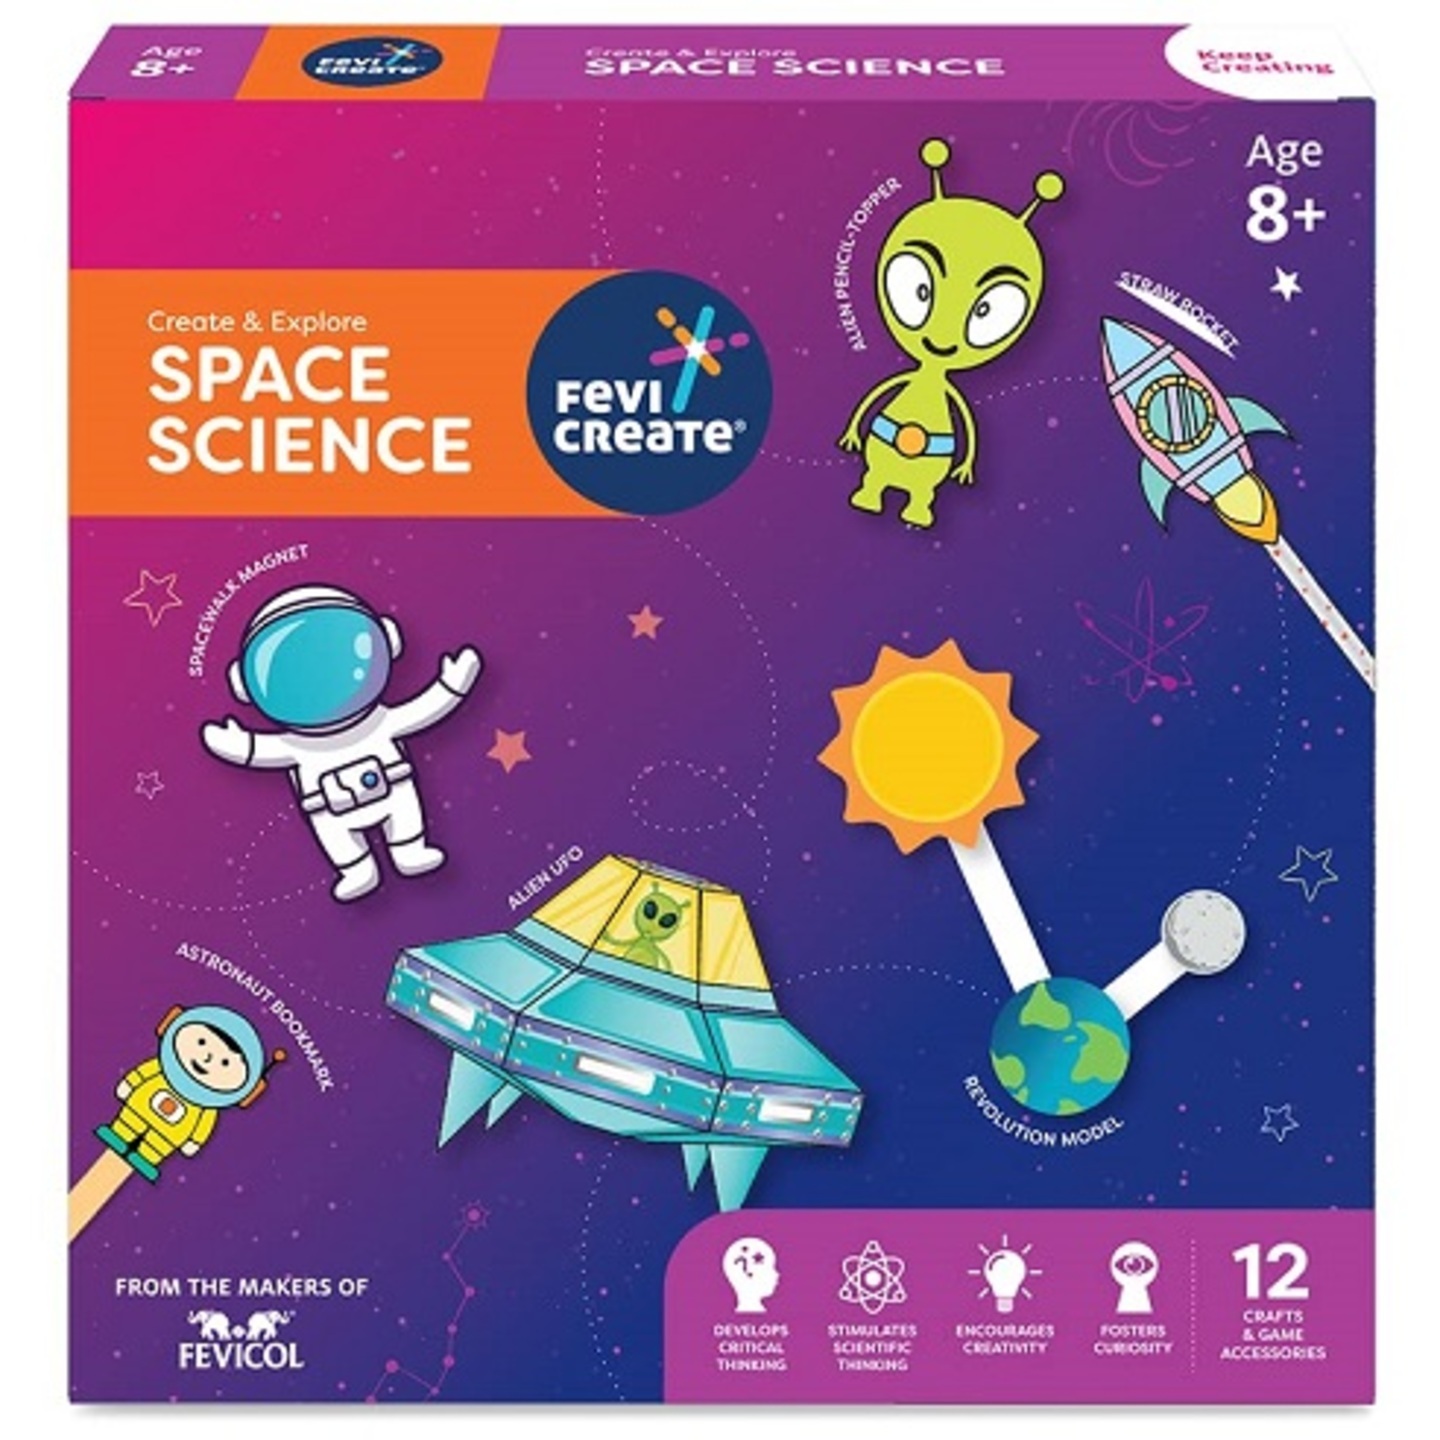 Fevicreate Space Science Art & Craft Kit 8+ years